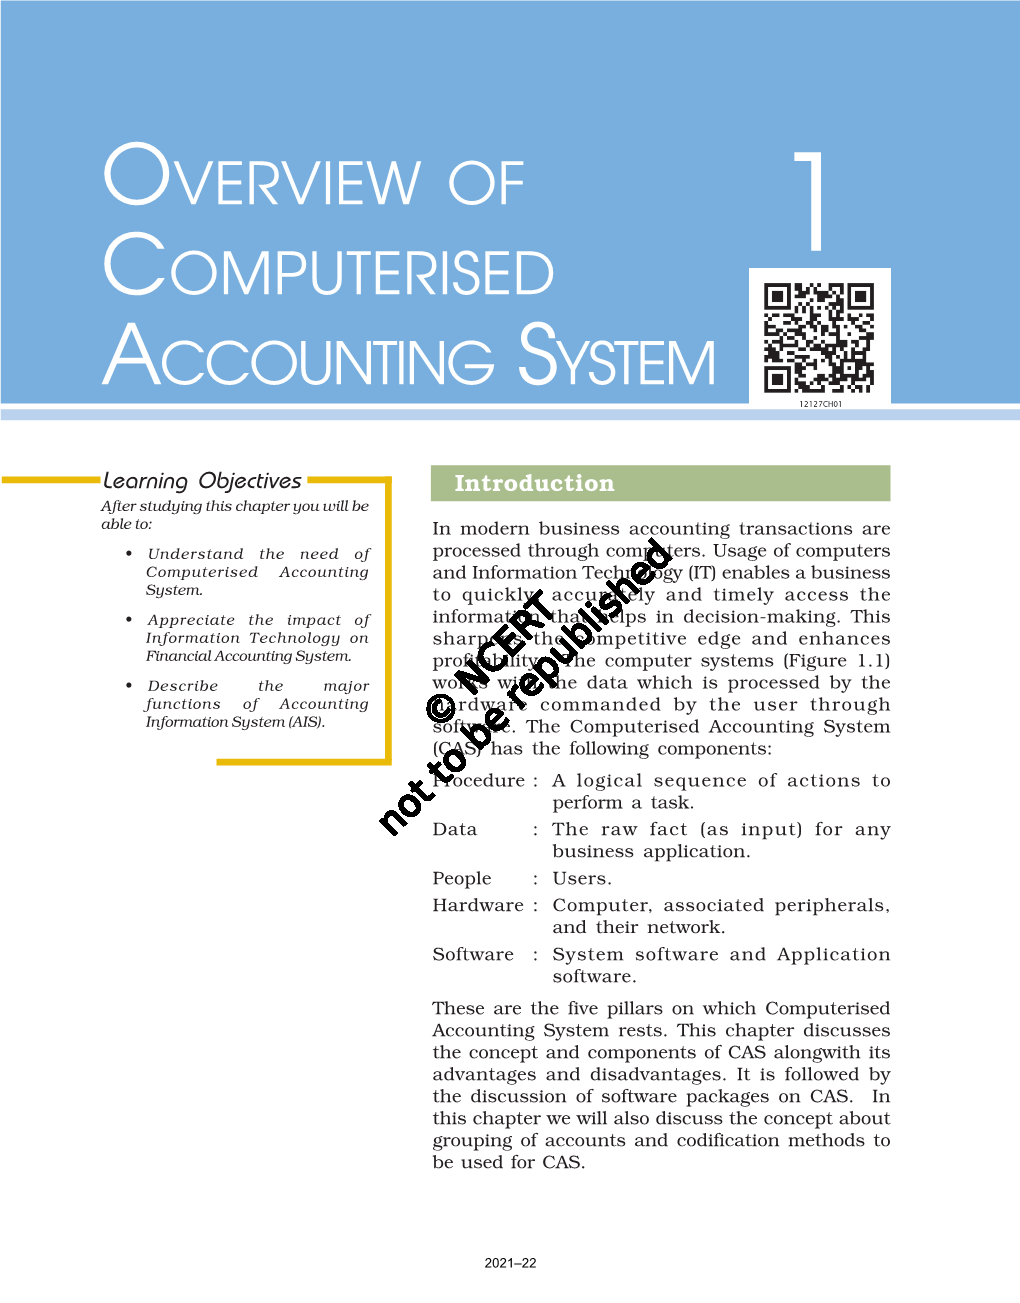 Overview of Computerised Accounting System